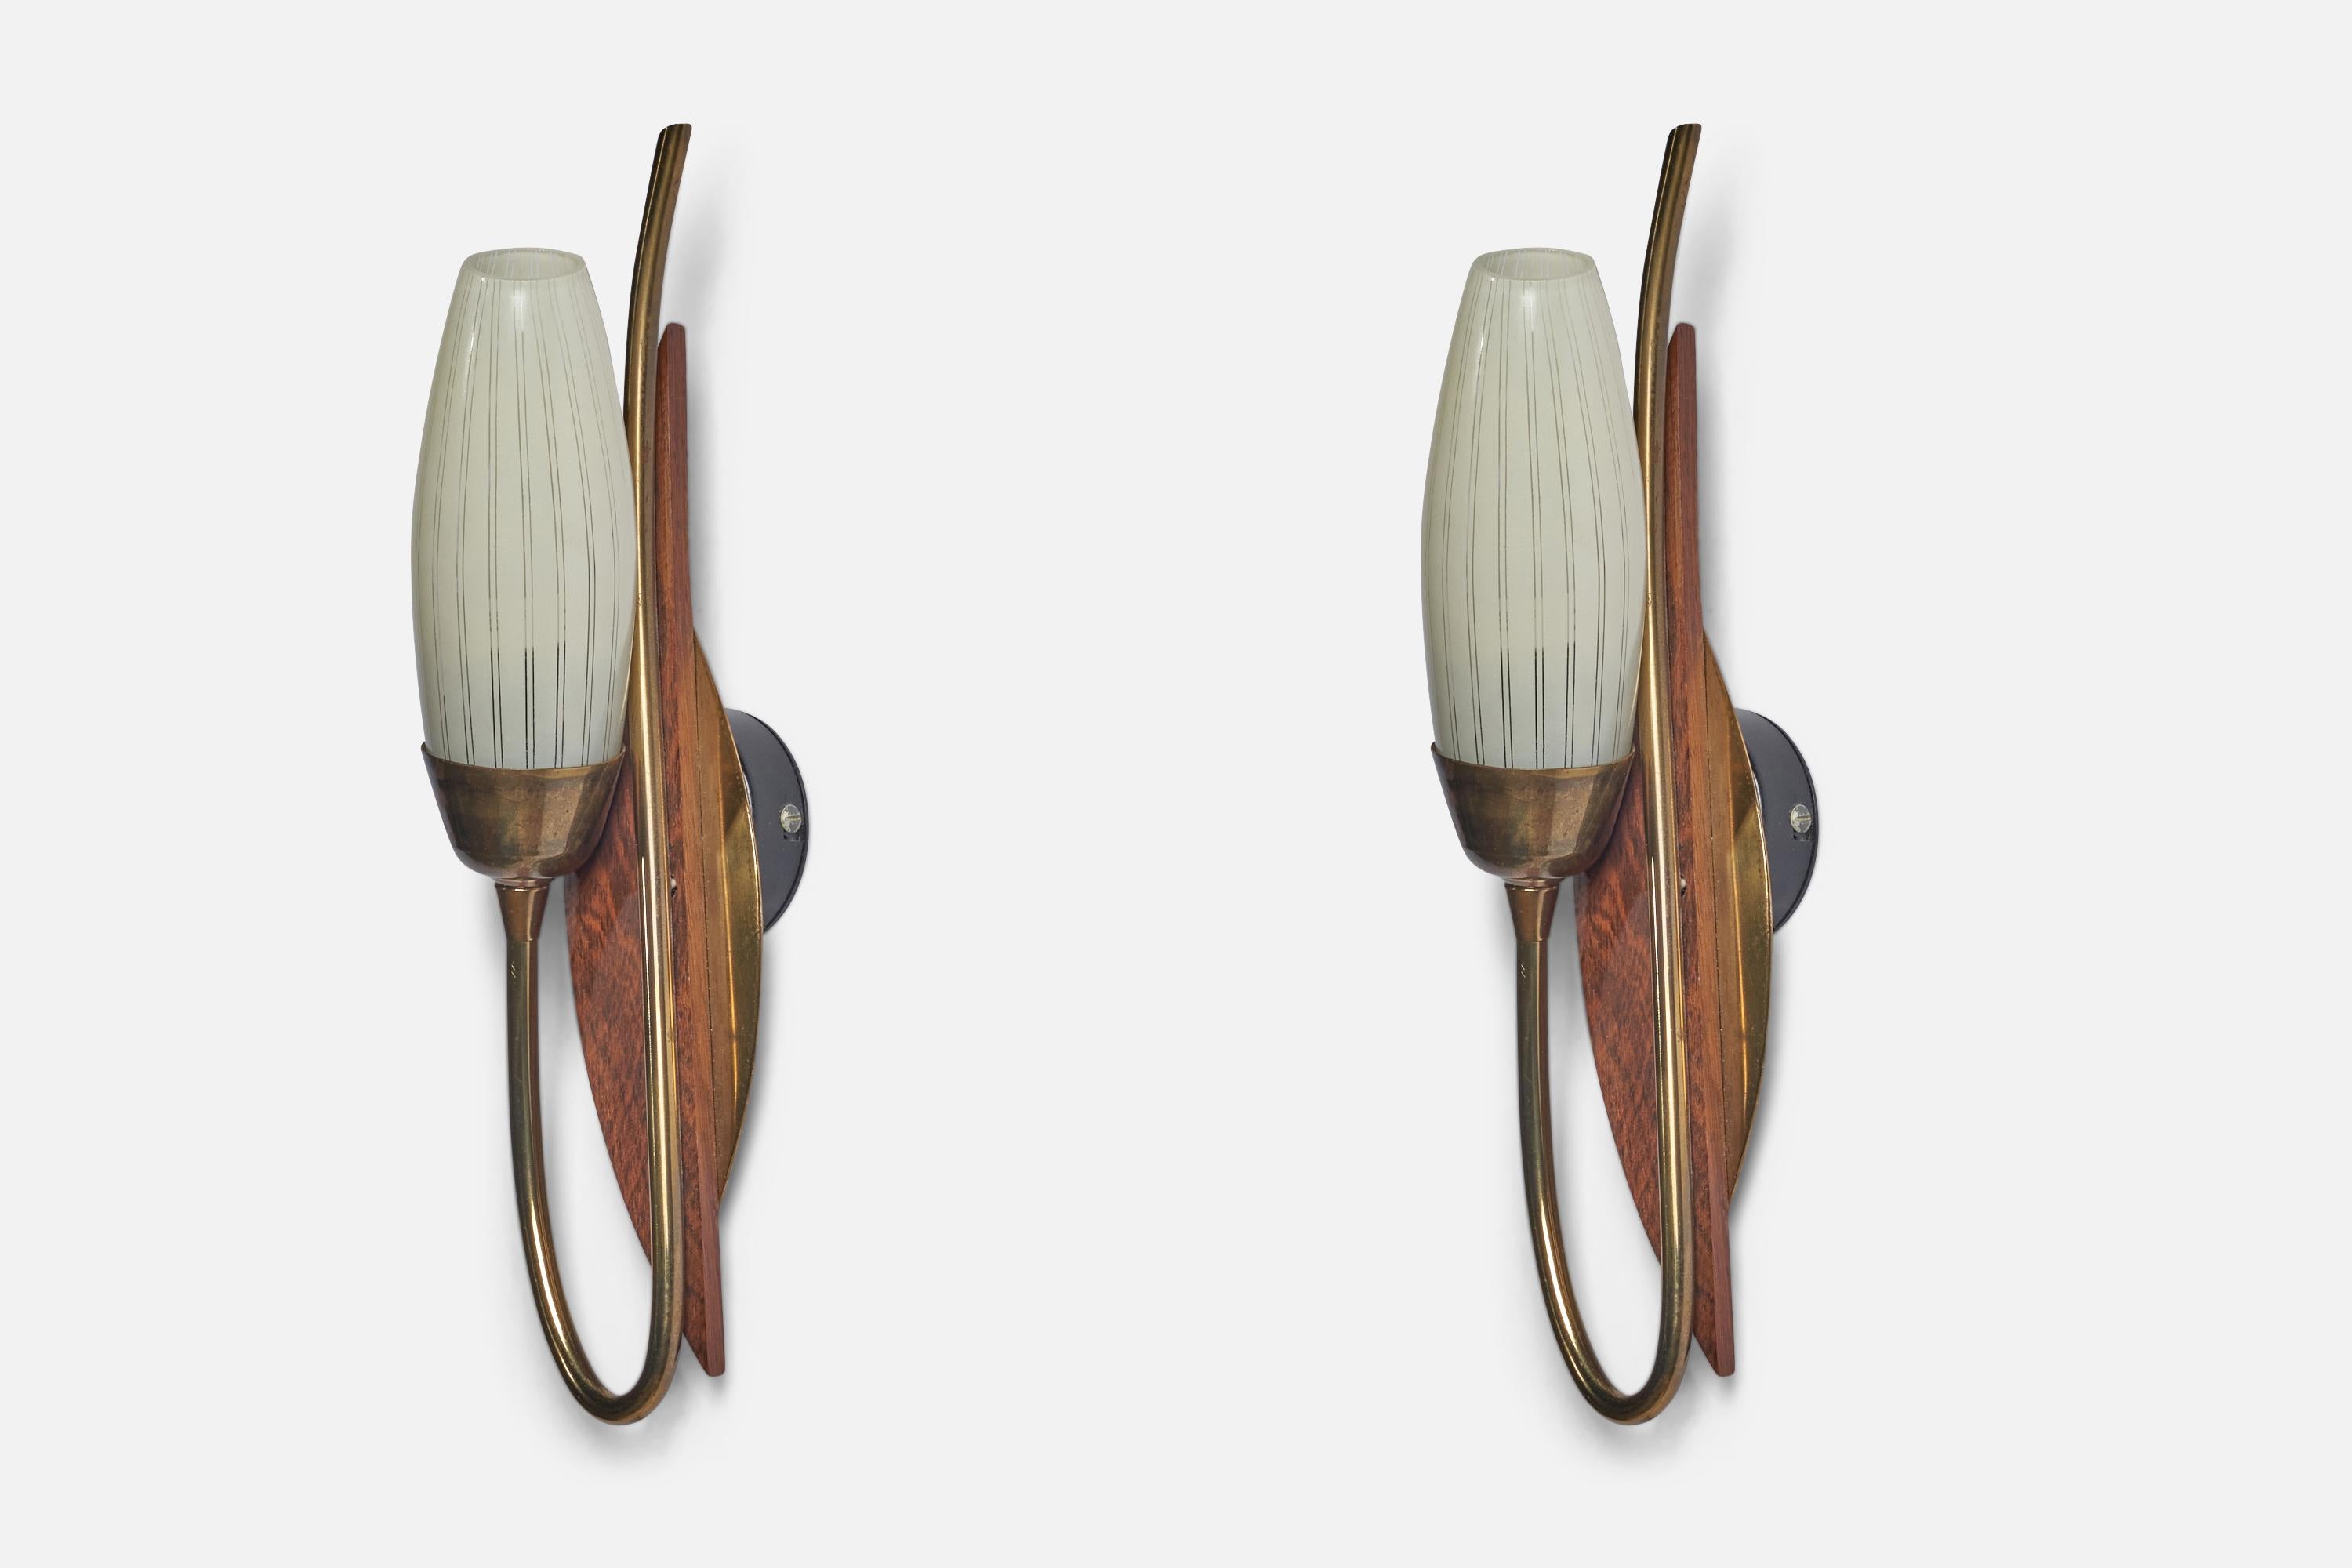 Swedish Designer, Wall Lights, Brass, Teak, Glass, Sweden, 1950s In Good Condition For Sale In High Point, NC